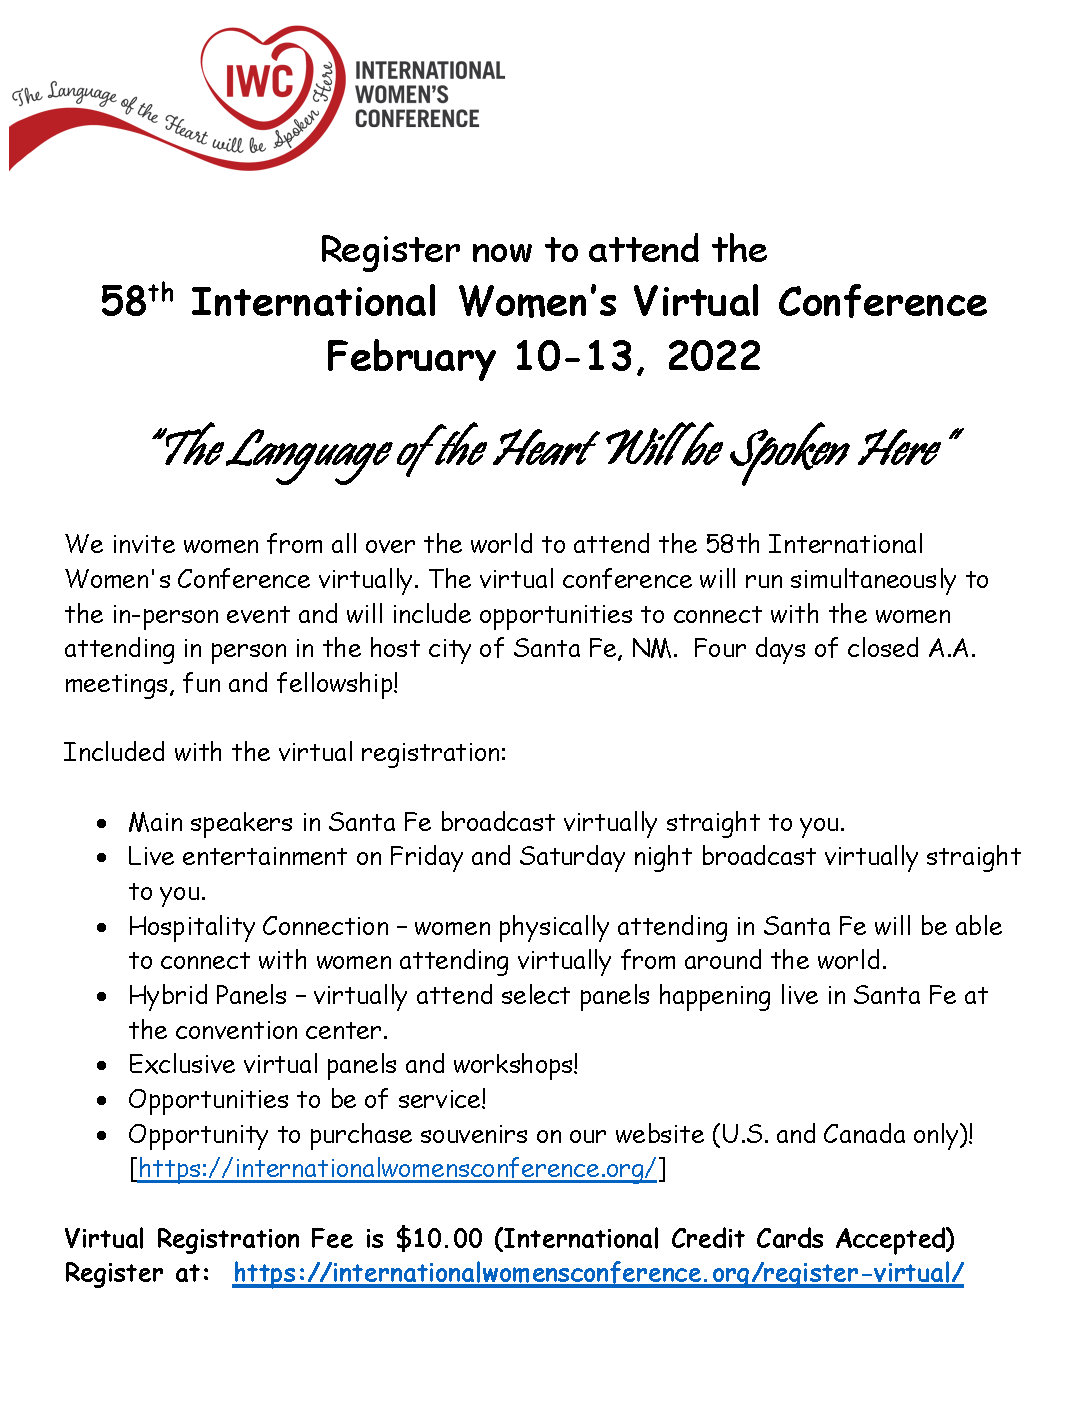 International-Womens-Conference-Flyer